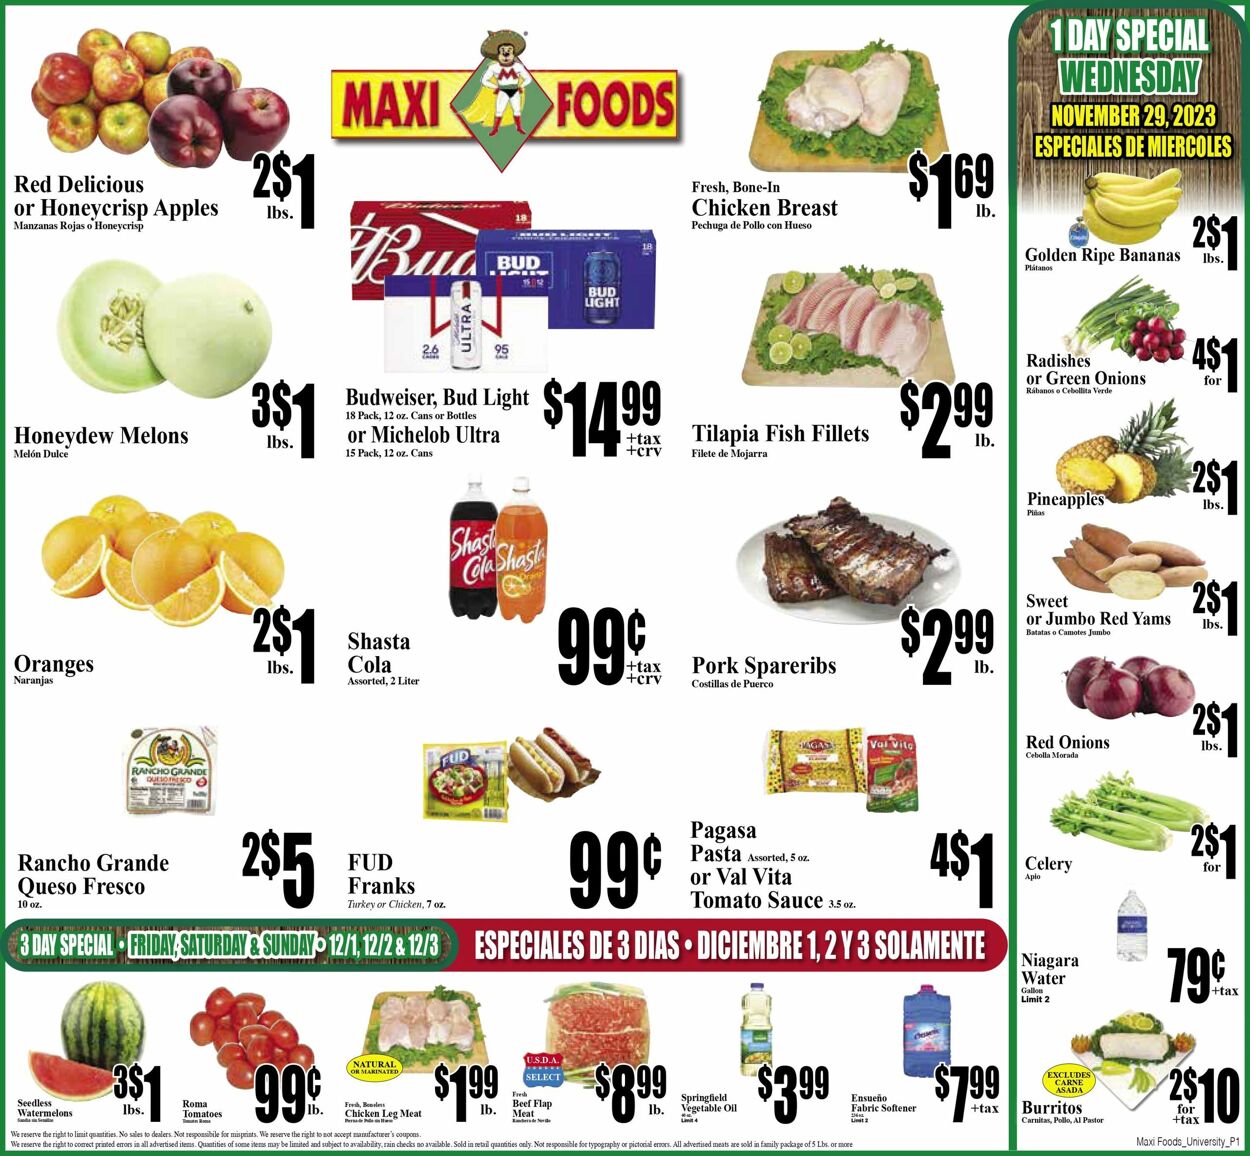 Maxi Foods Promotional weekly ads